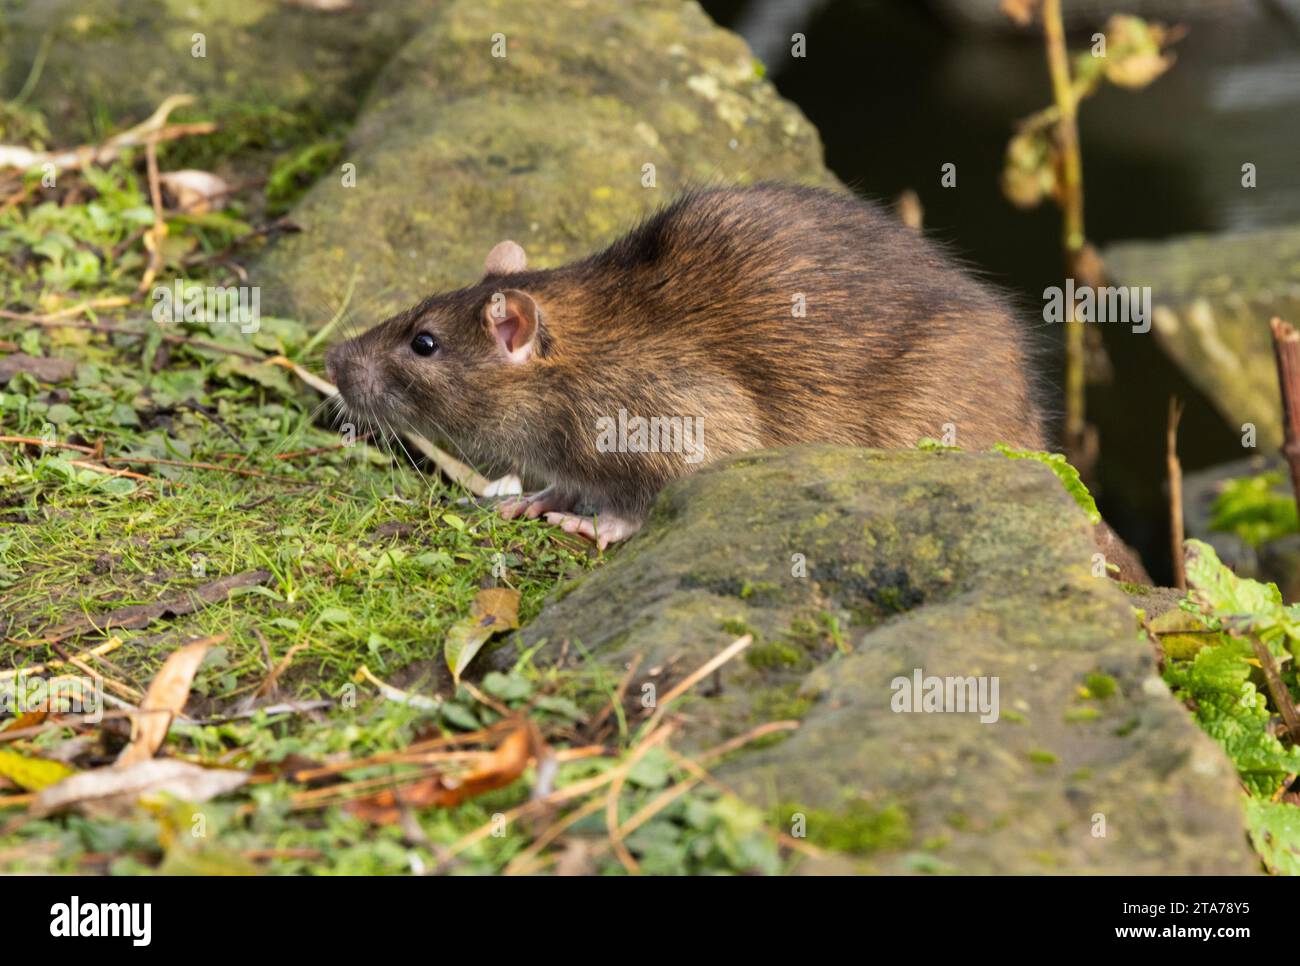 The Brown Rat is one of the few mammals to thrive around mankind. They are intelligent and quick to exploit any form of food and shelter provided. Stock Photo